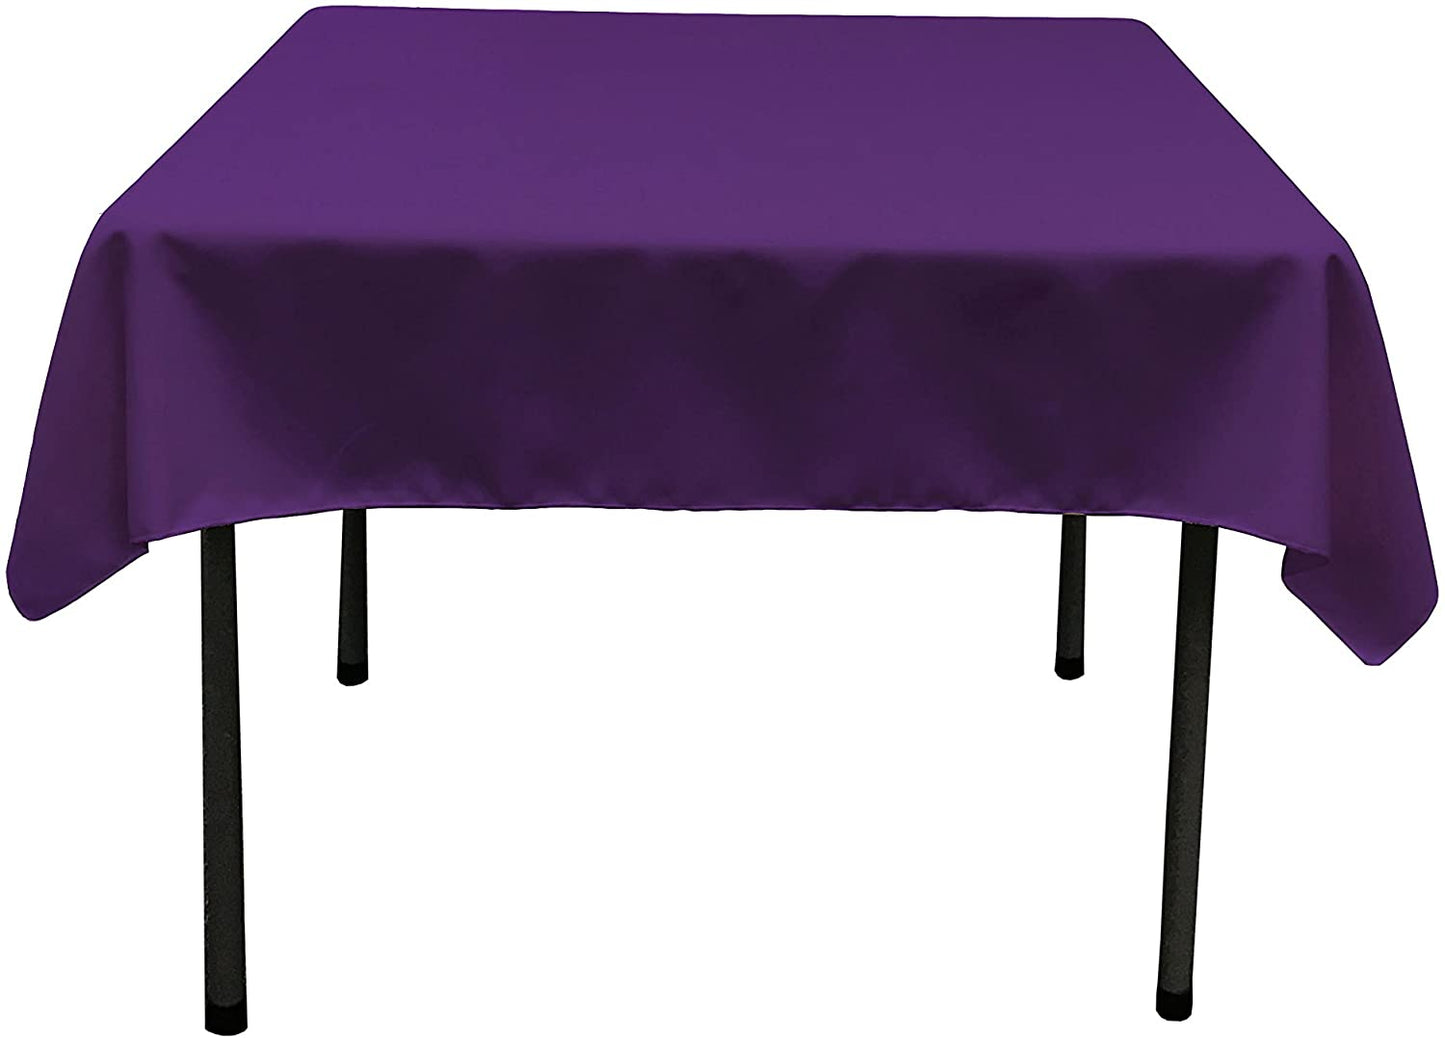 Polyester Poplin Washable Square Tablecloth, Stain and Wrinkle Resistant Table Cover Purple